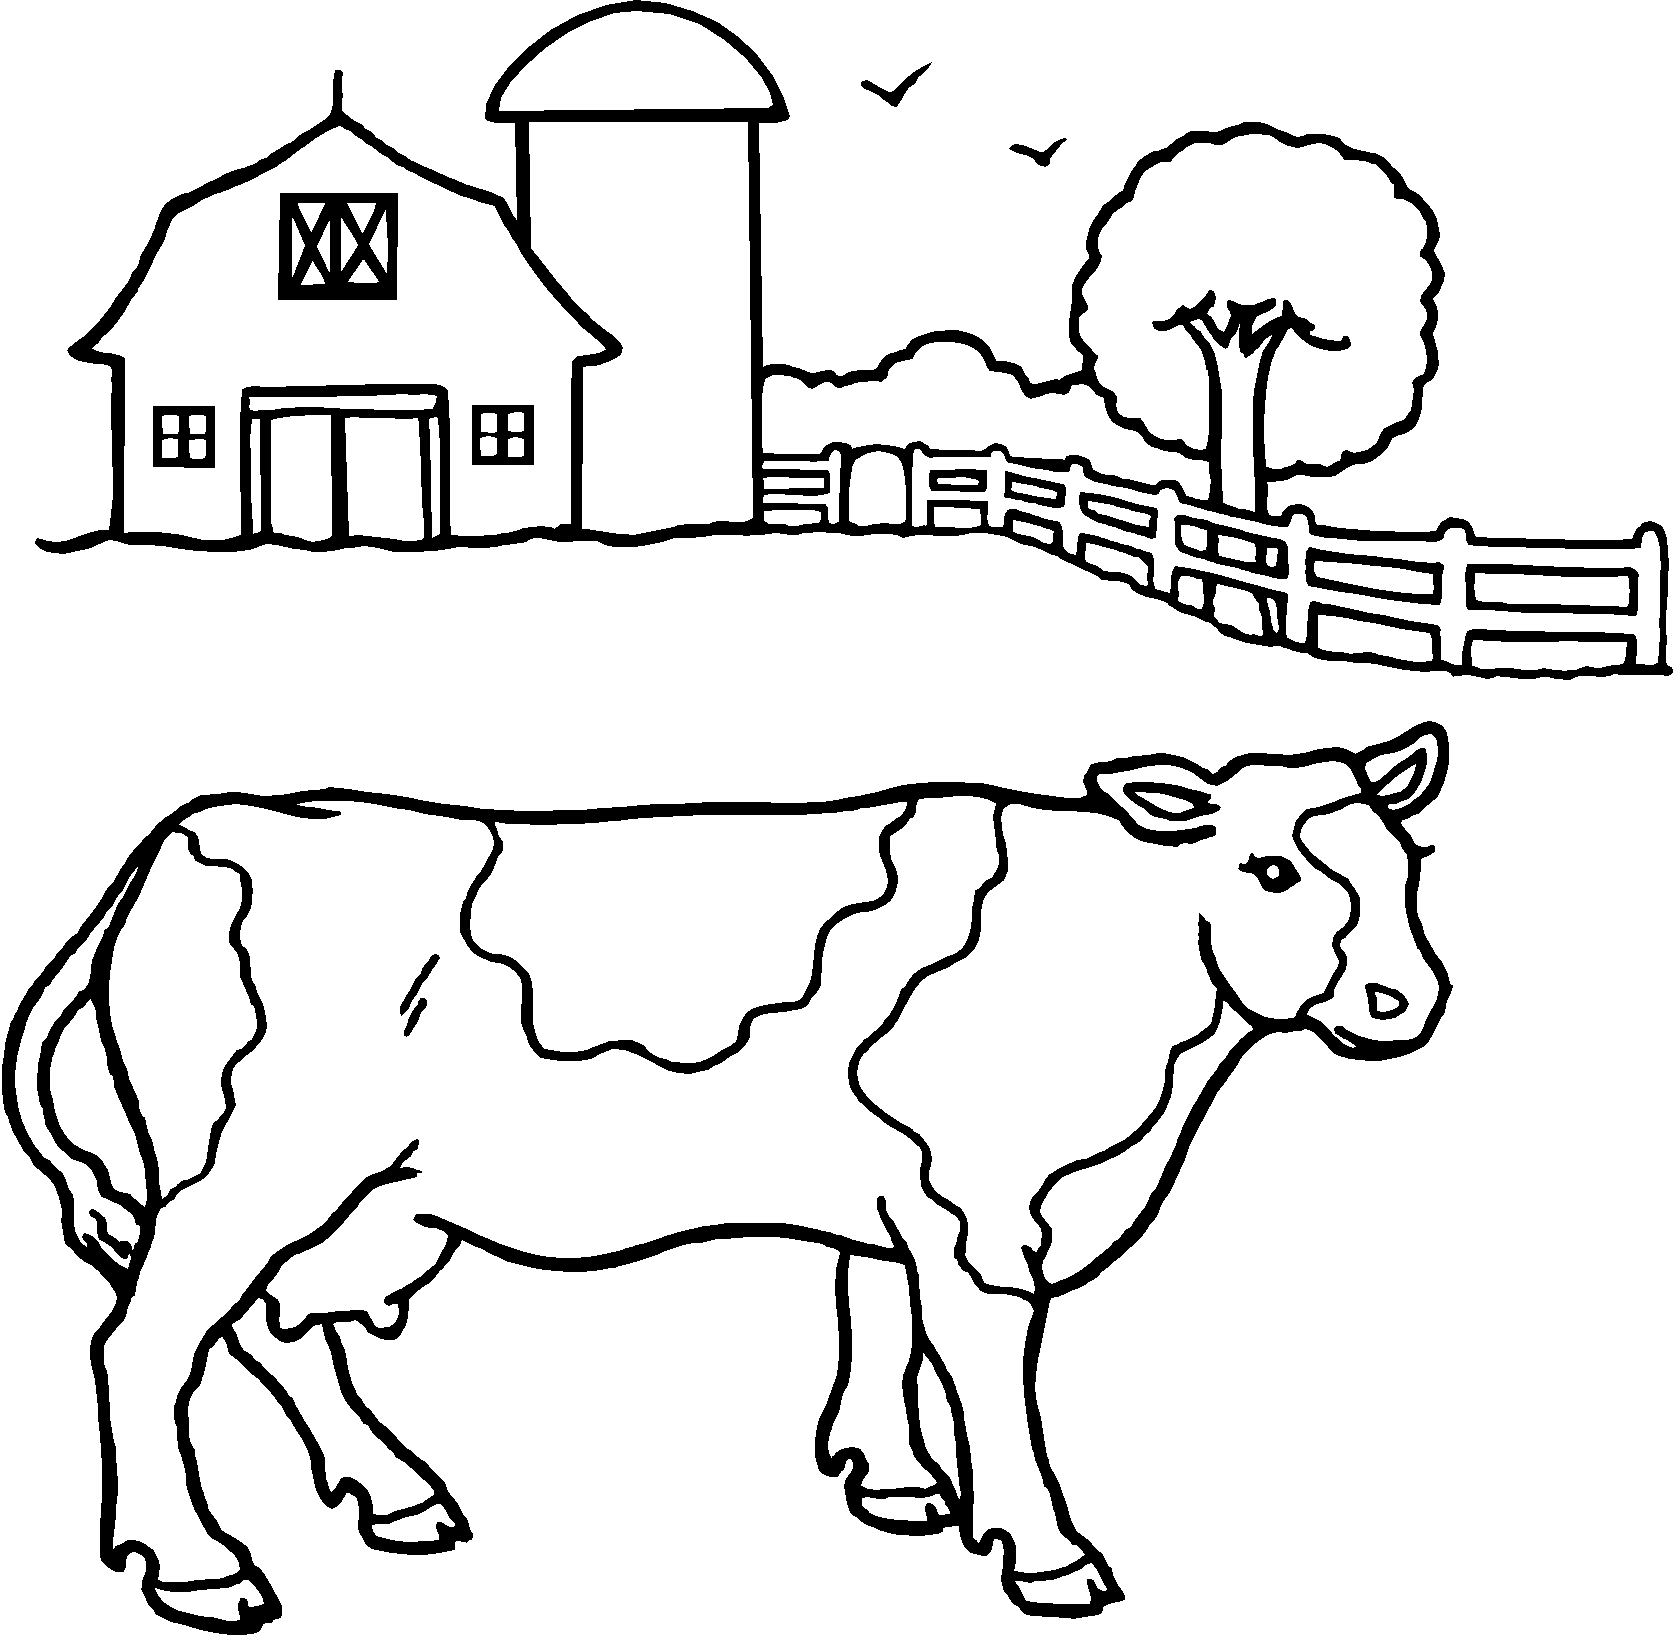 928 Simple Cow Coloring Pages for Kids